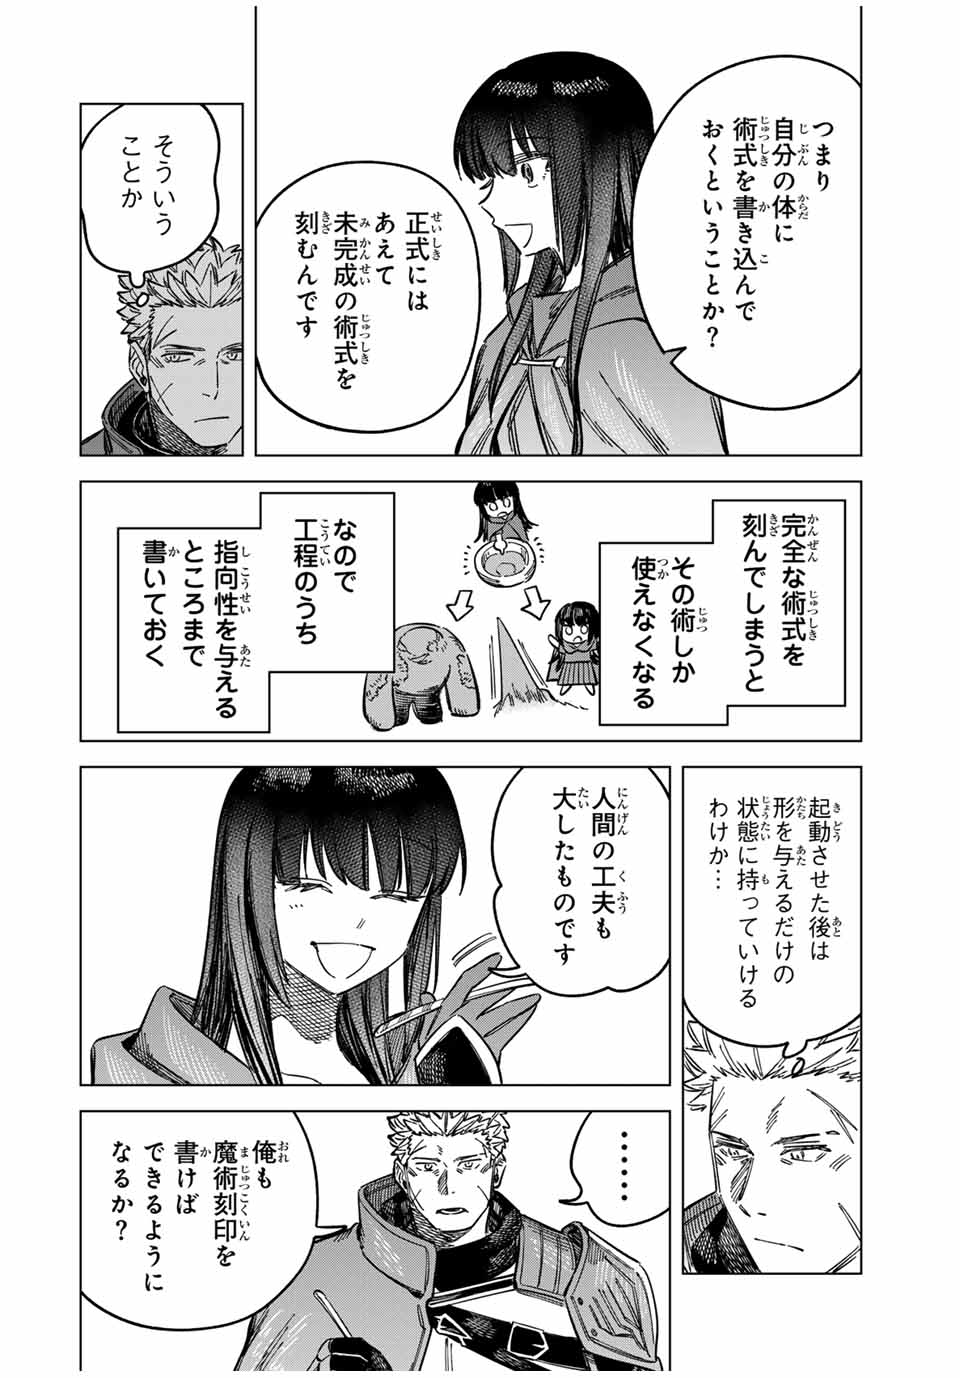 Witch and Mercenary 魔女と傭兵 第6話 - Page 10